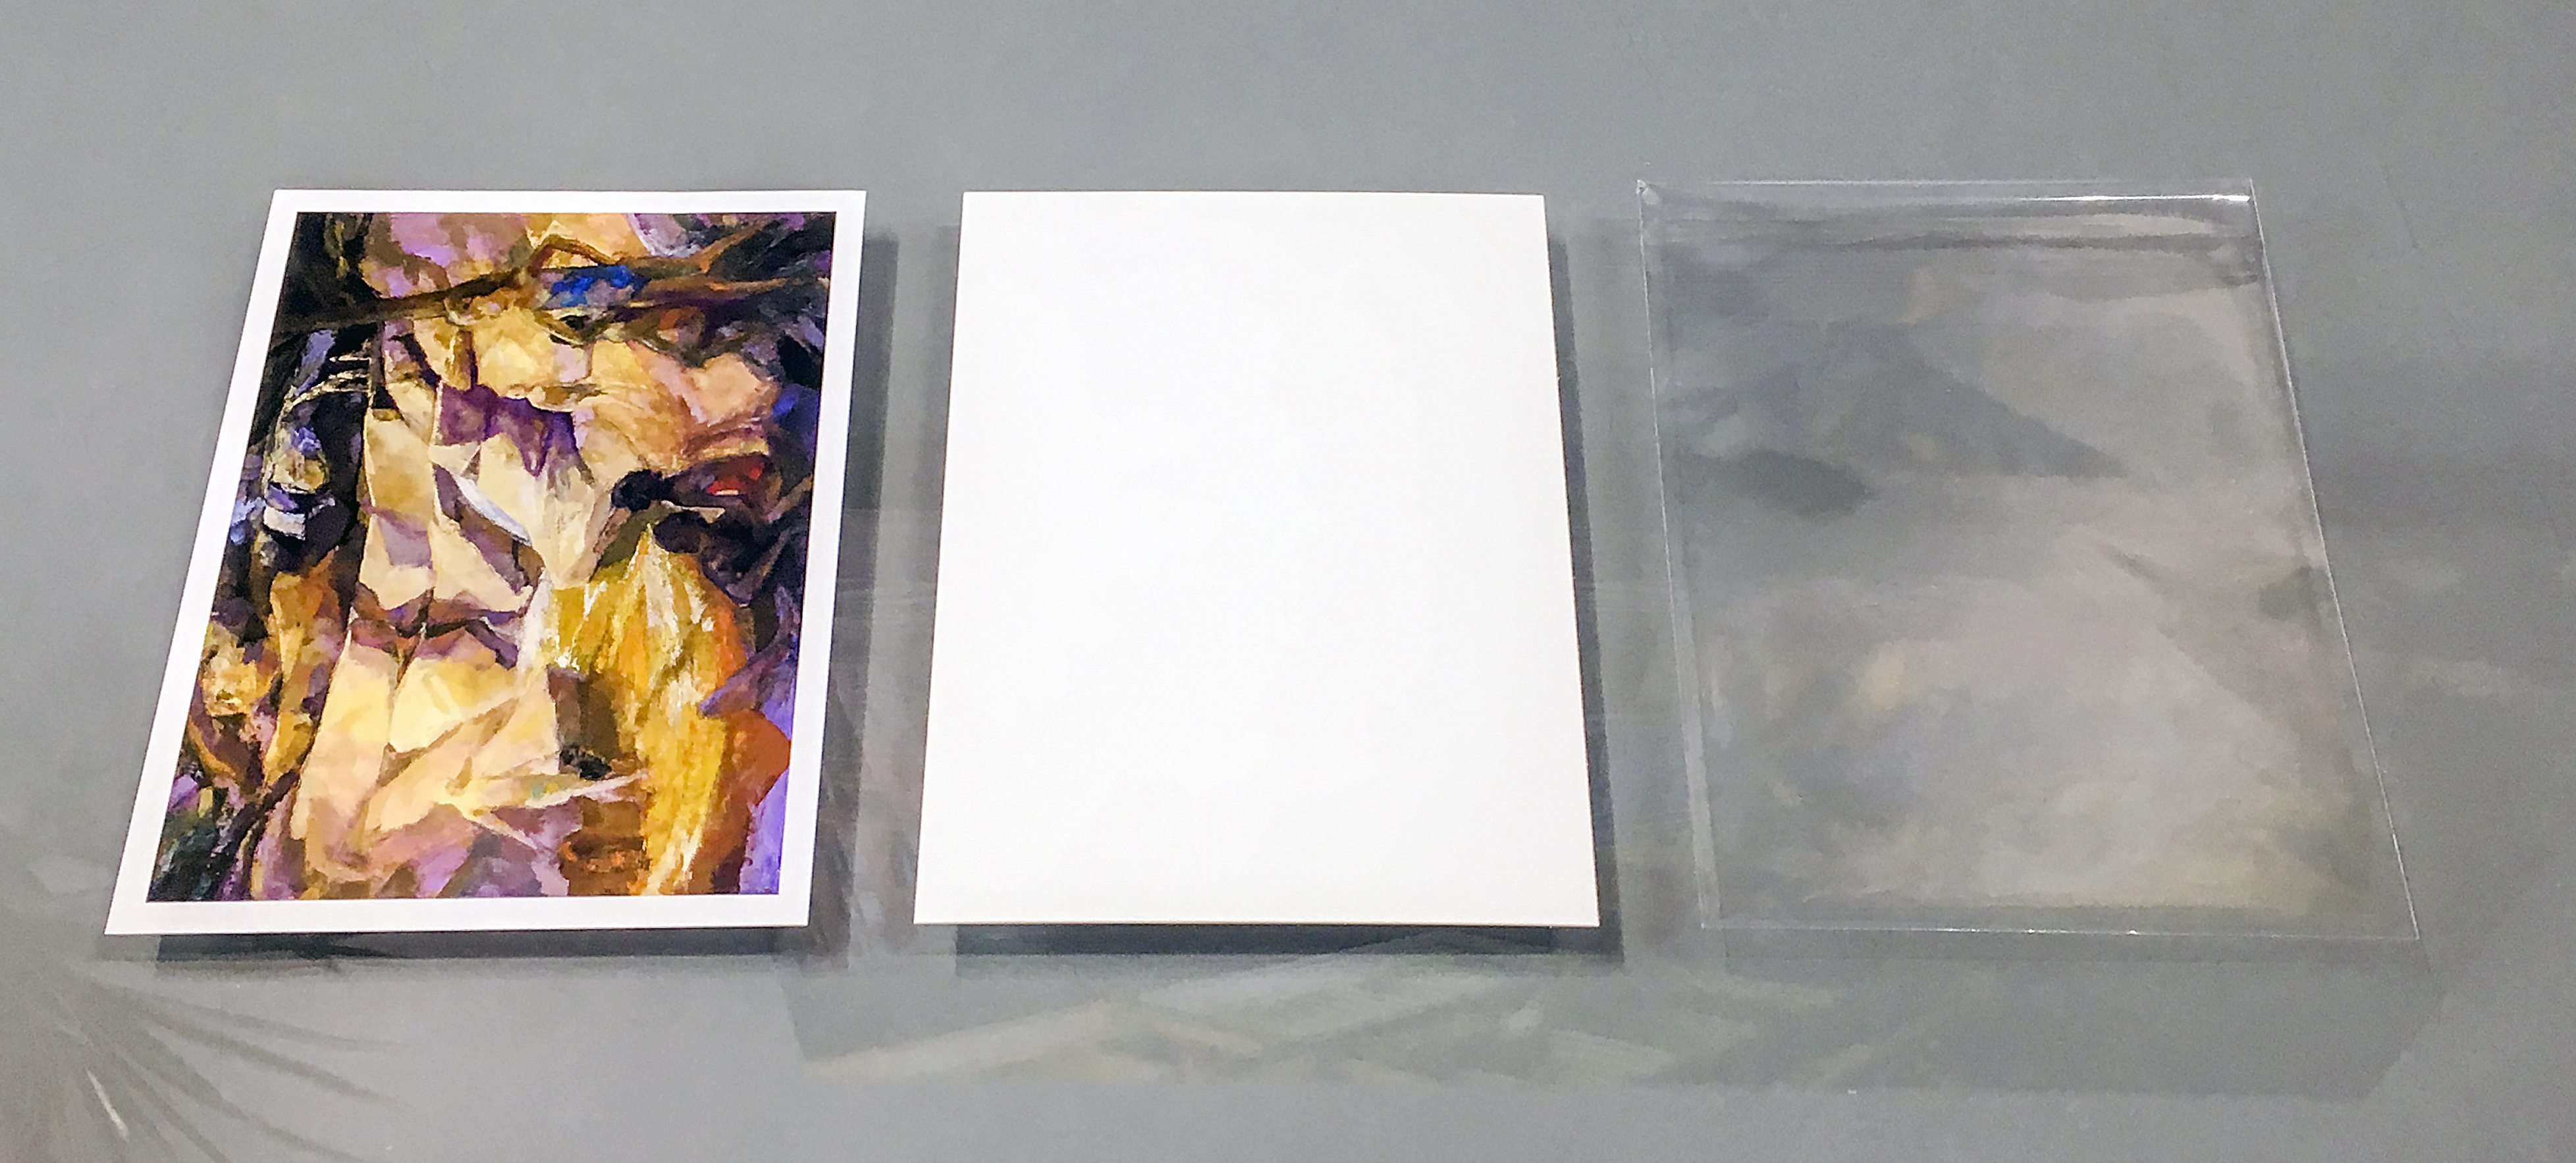 Print, backing board, and sleeve for displaying prints